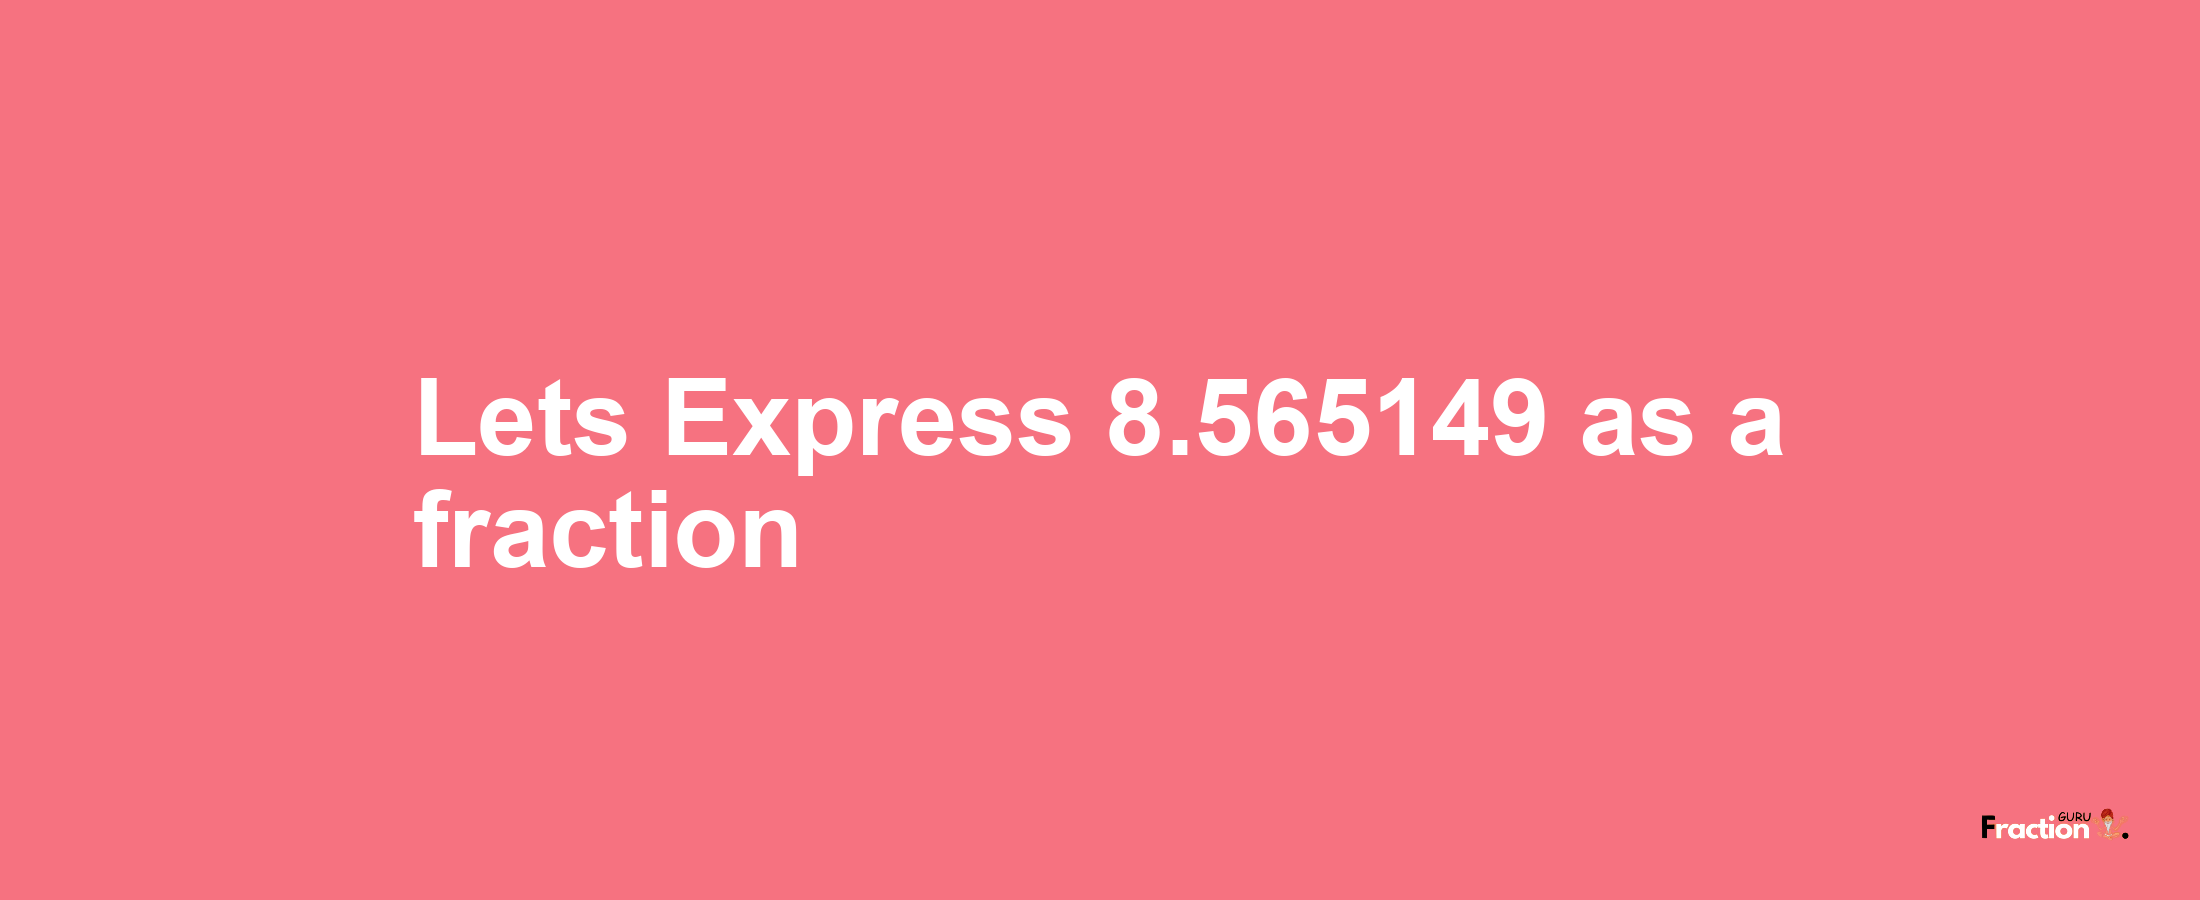 Lets Express 8.565149 as afraction